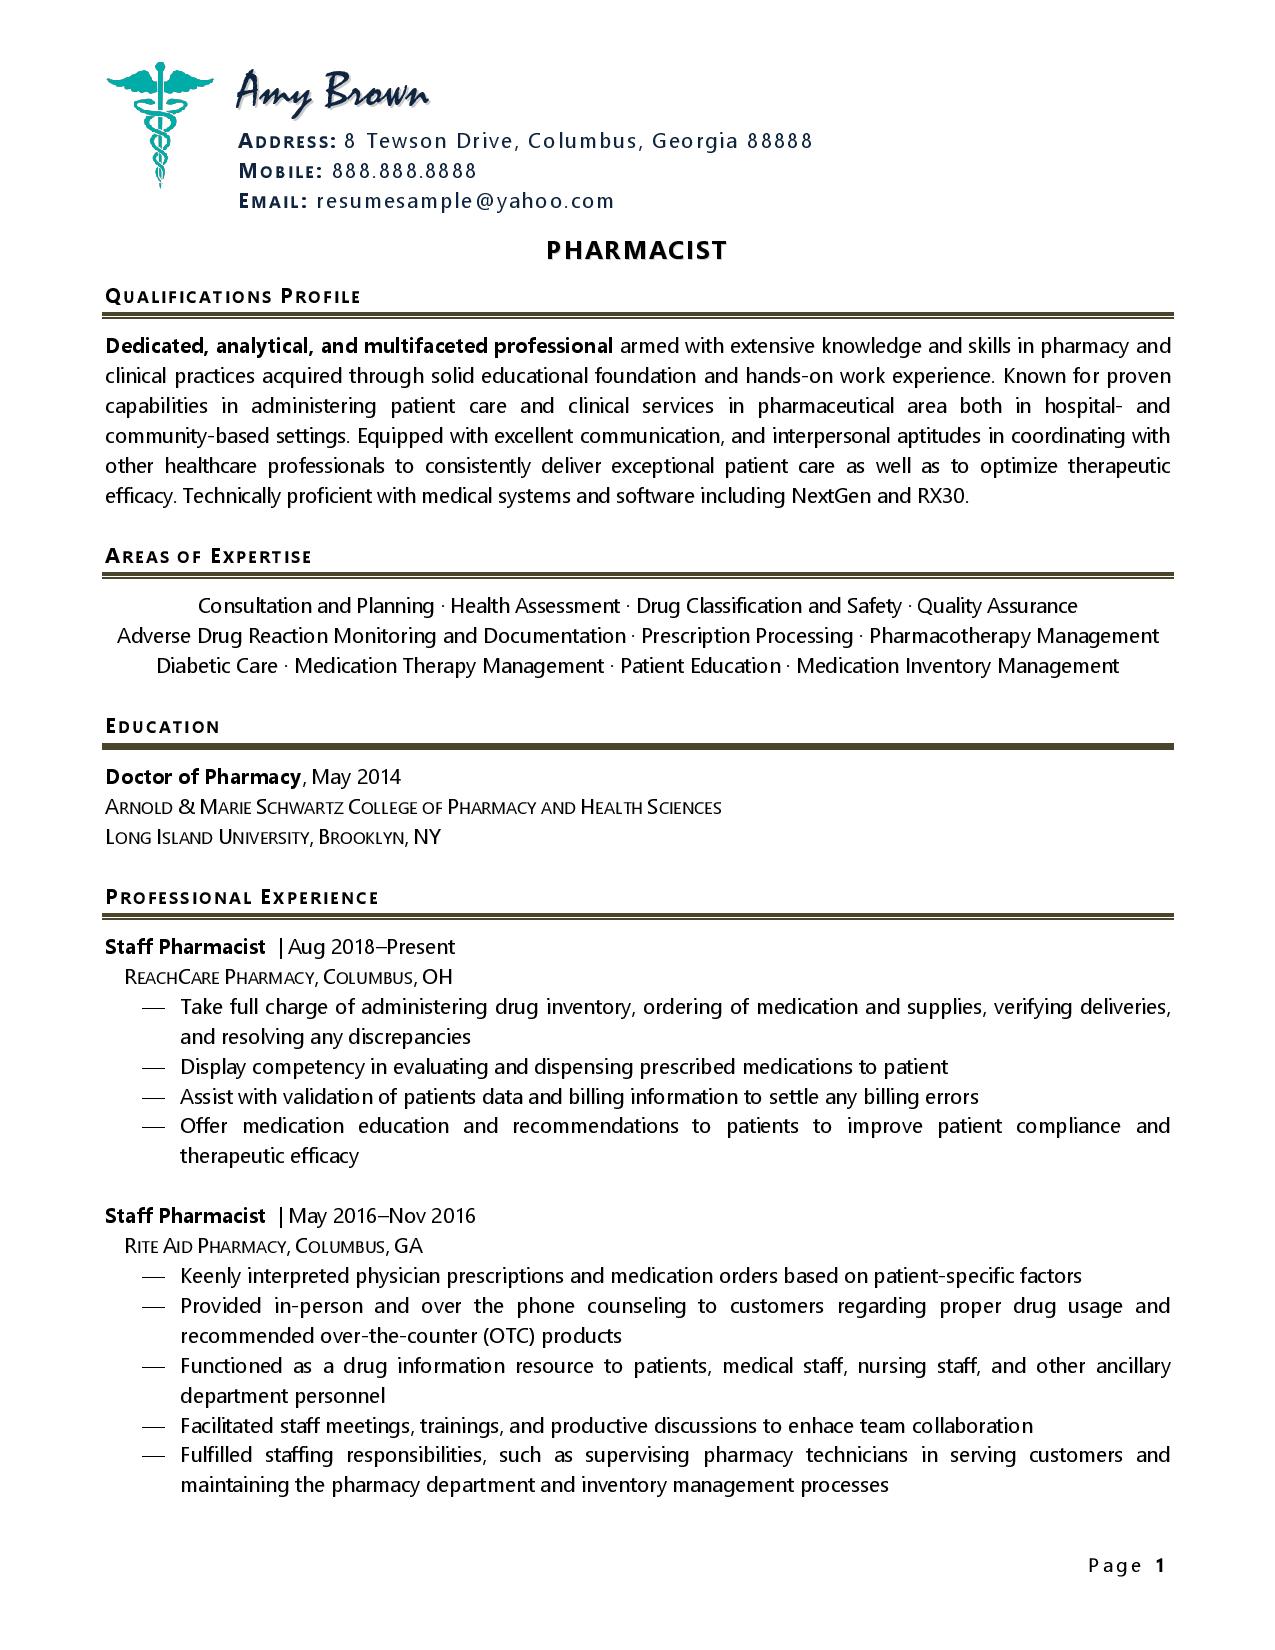 Pharmacist Resume Template Examples Skills More - vrogue.co